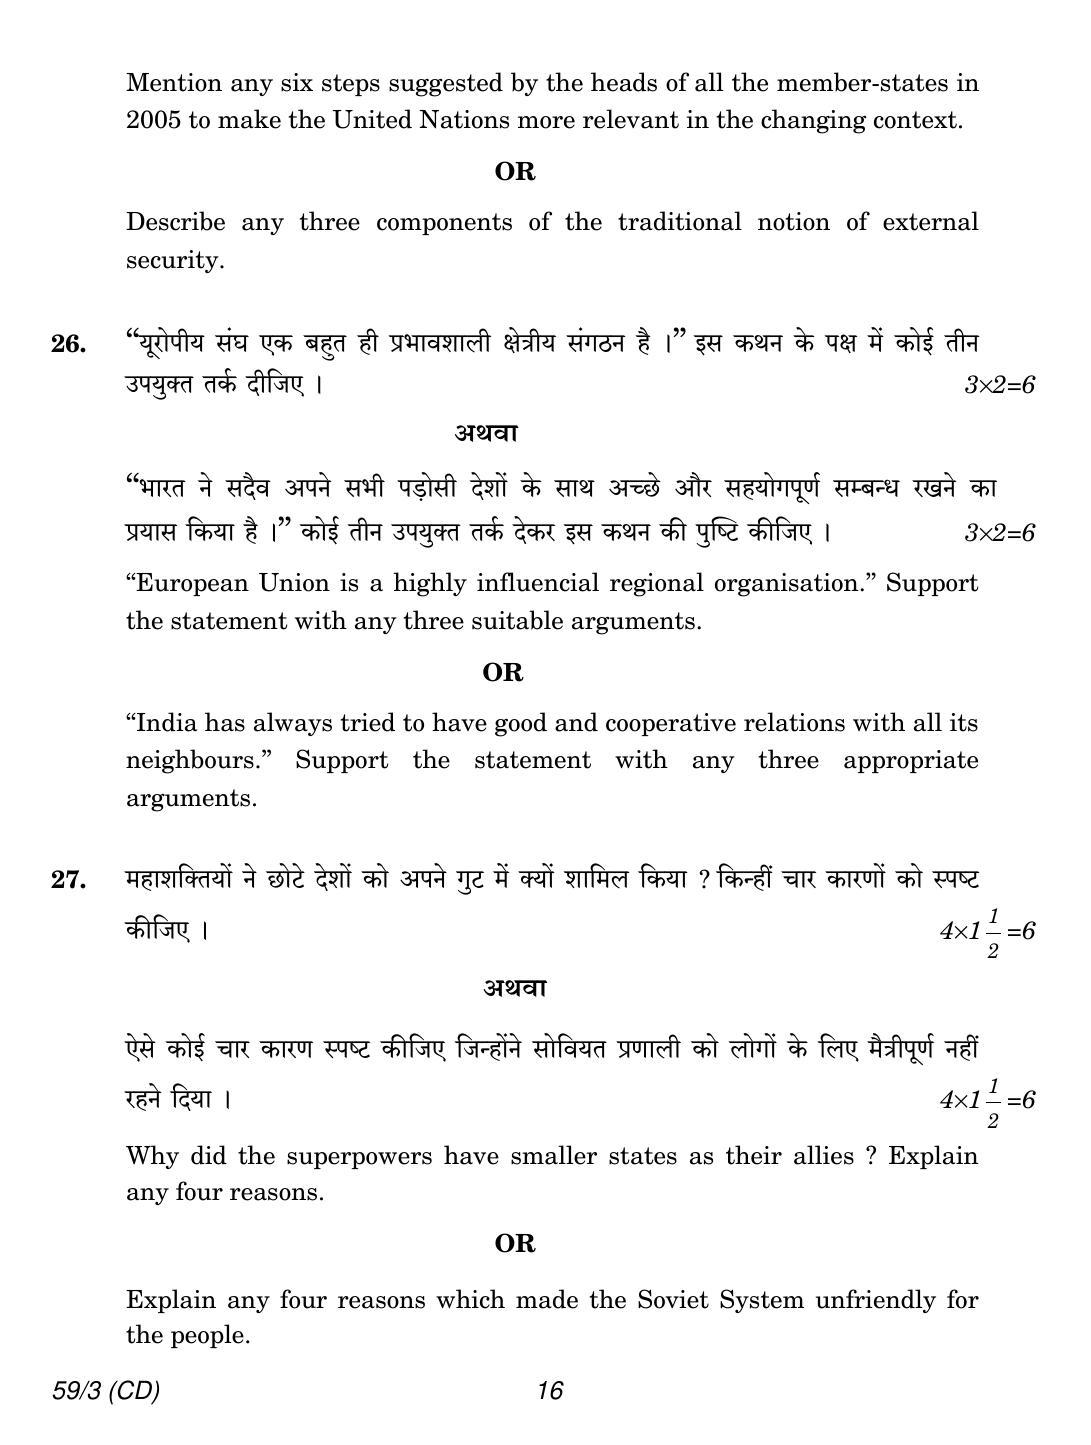 CBSE Class 12 59-3 POLITICAL SCIENCE CD 2018 Question Paper - Page 16